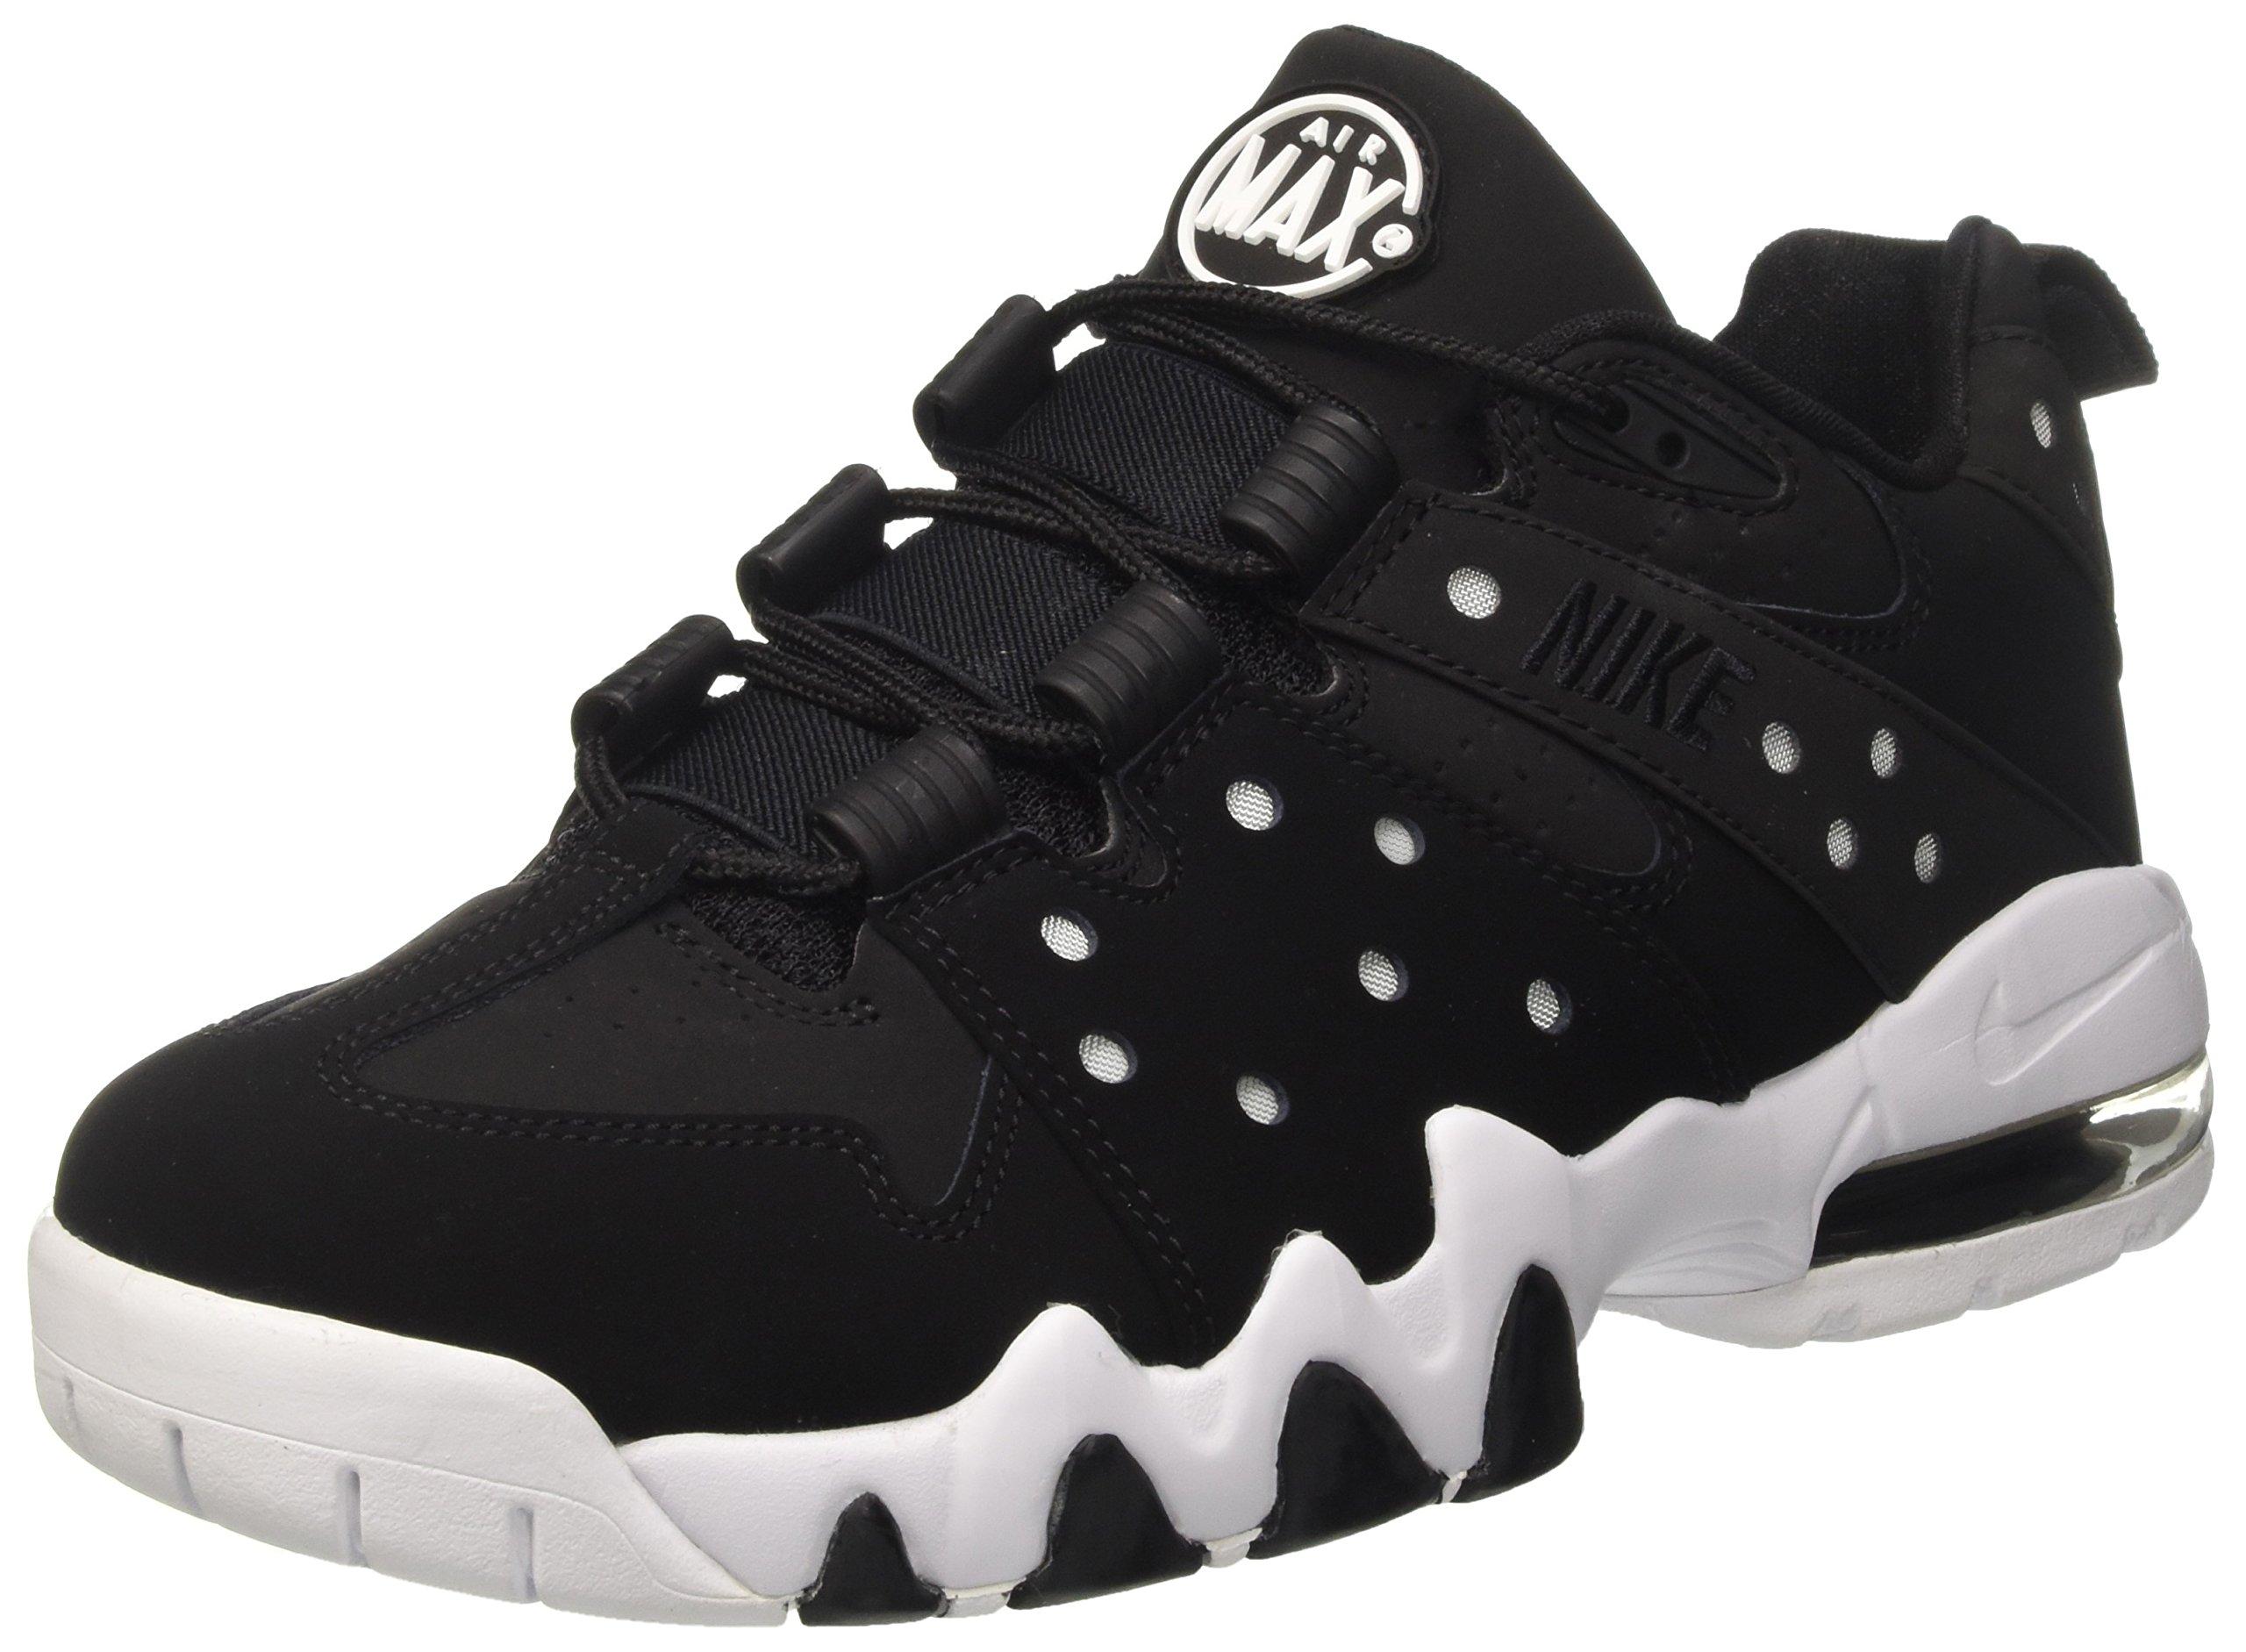 Nike Air Max2 Cb '94 Low Basketball Shoes in Black White Black (Black) for  Men - Lyst